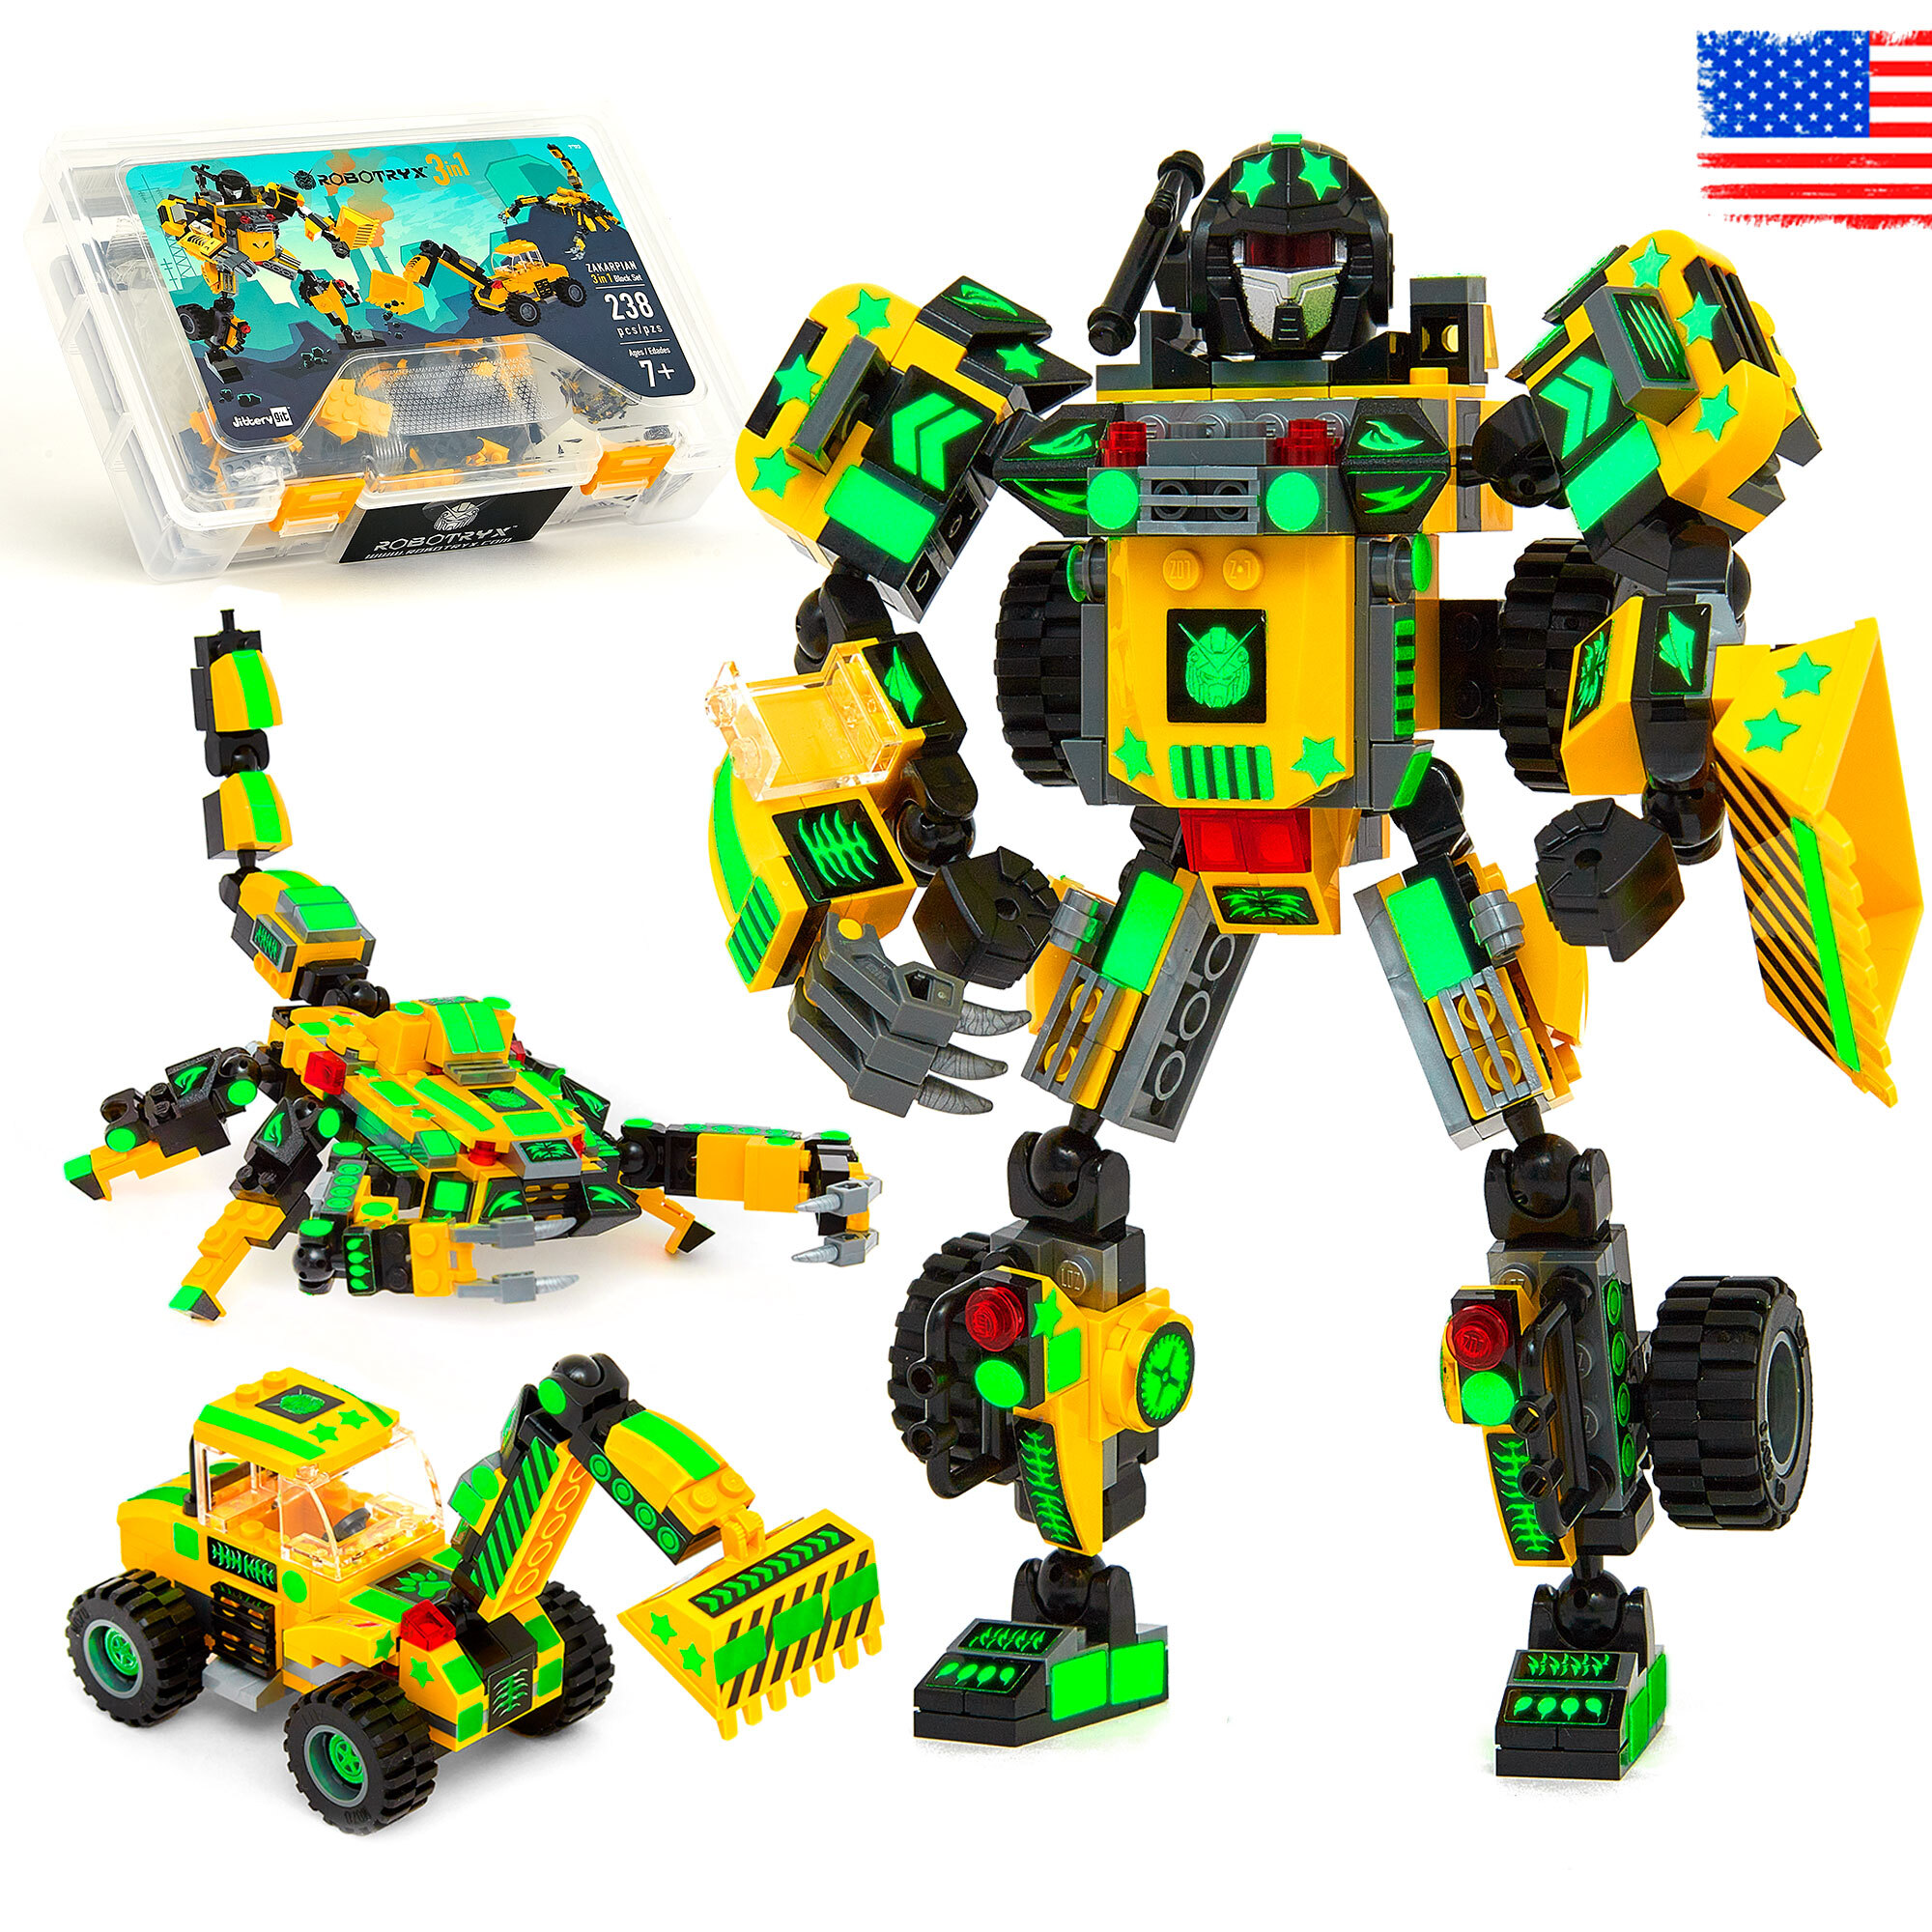 JitteryGit Robot STEM Building Toys for Boys | Christmas Gifts for Kids Ages 7 8 9 10 11 12 13 14 - image 1 of 9